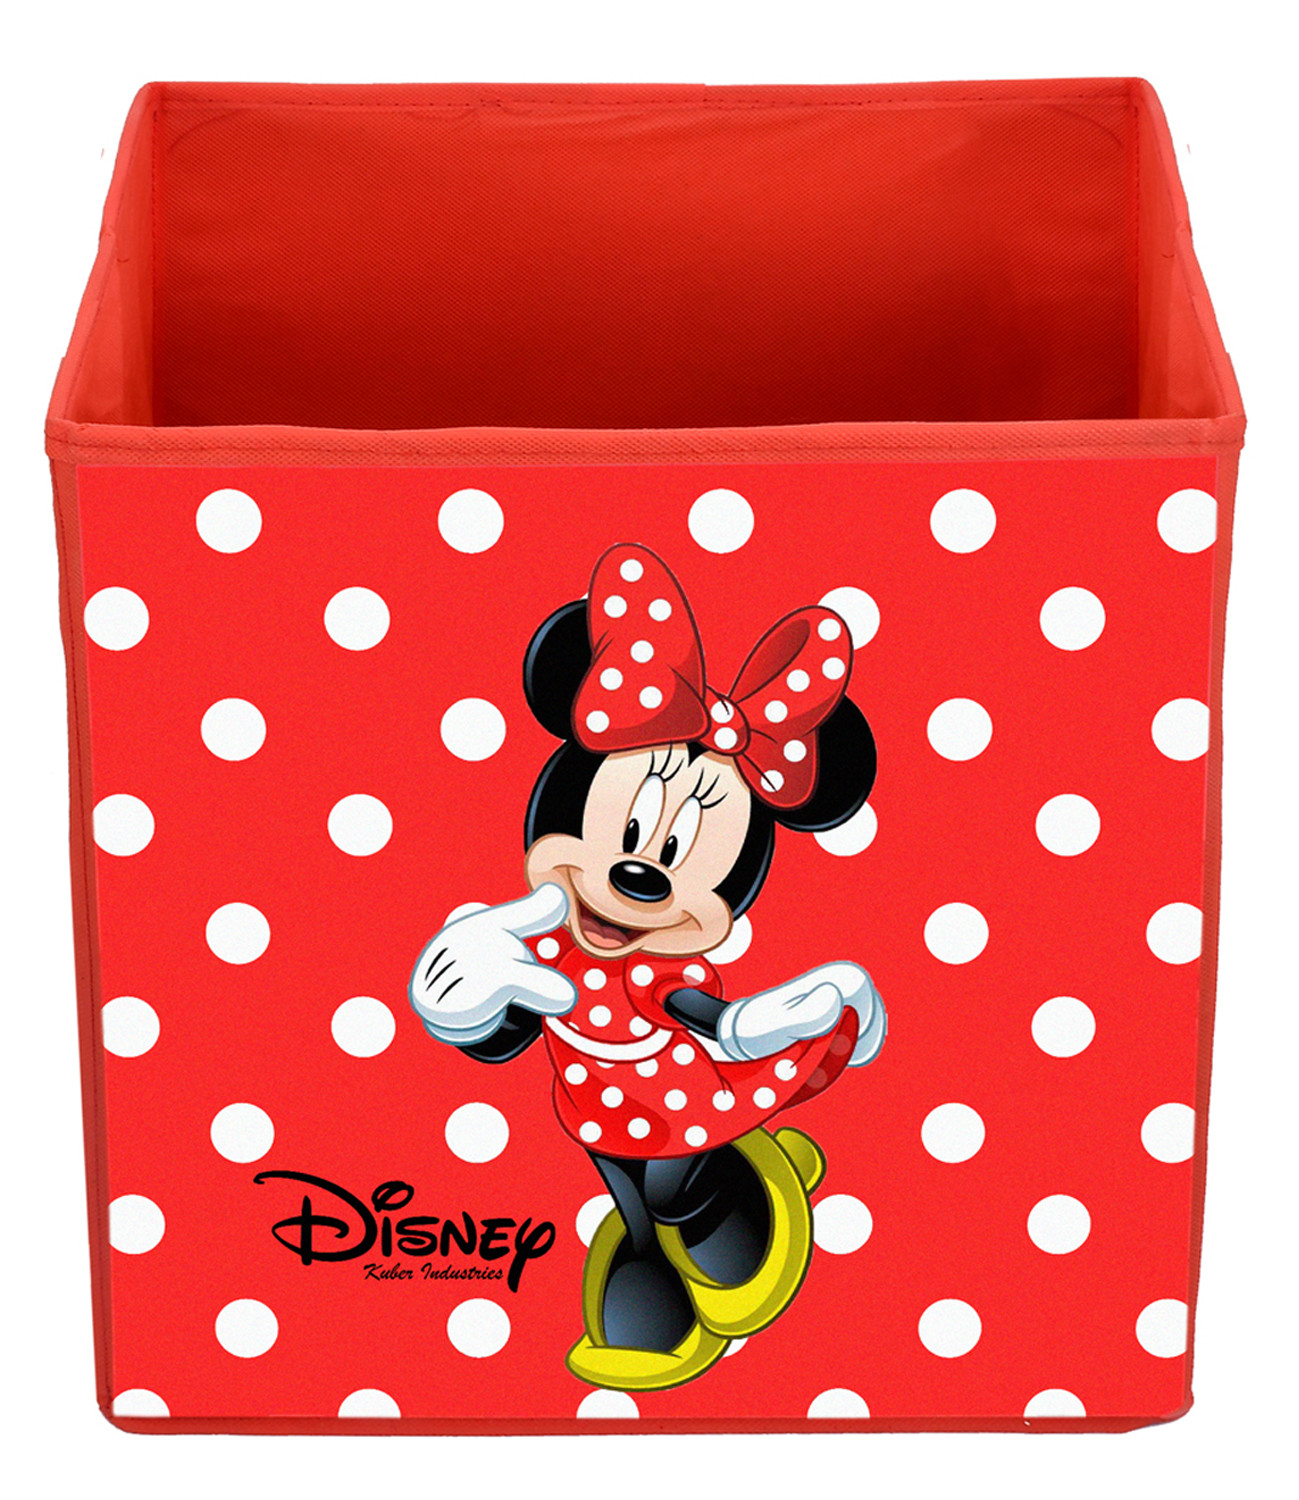 Kuber Industries Disney Winnie-The-Pooh & Minnie Print Non Woven Fabric Foldable Large Size Storage Cube Toy,Books,Shoes Storage Box With Handle (Red & Brown)